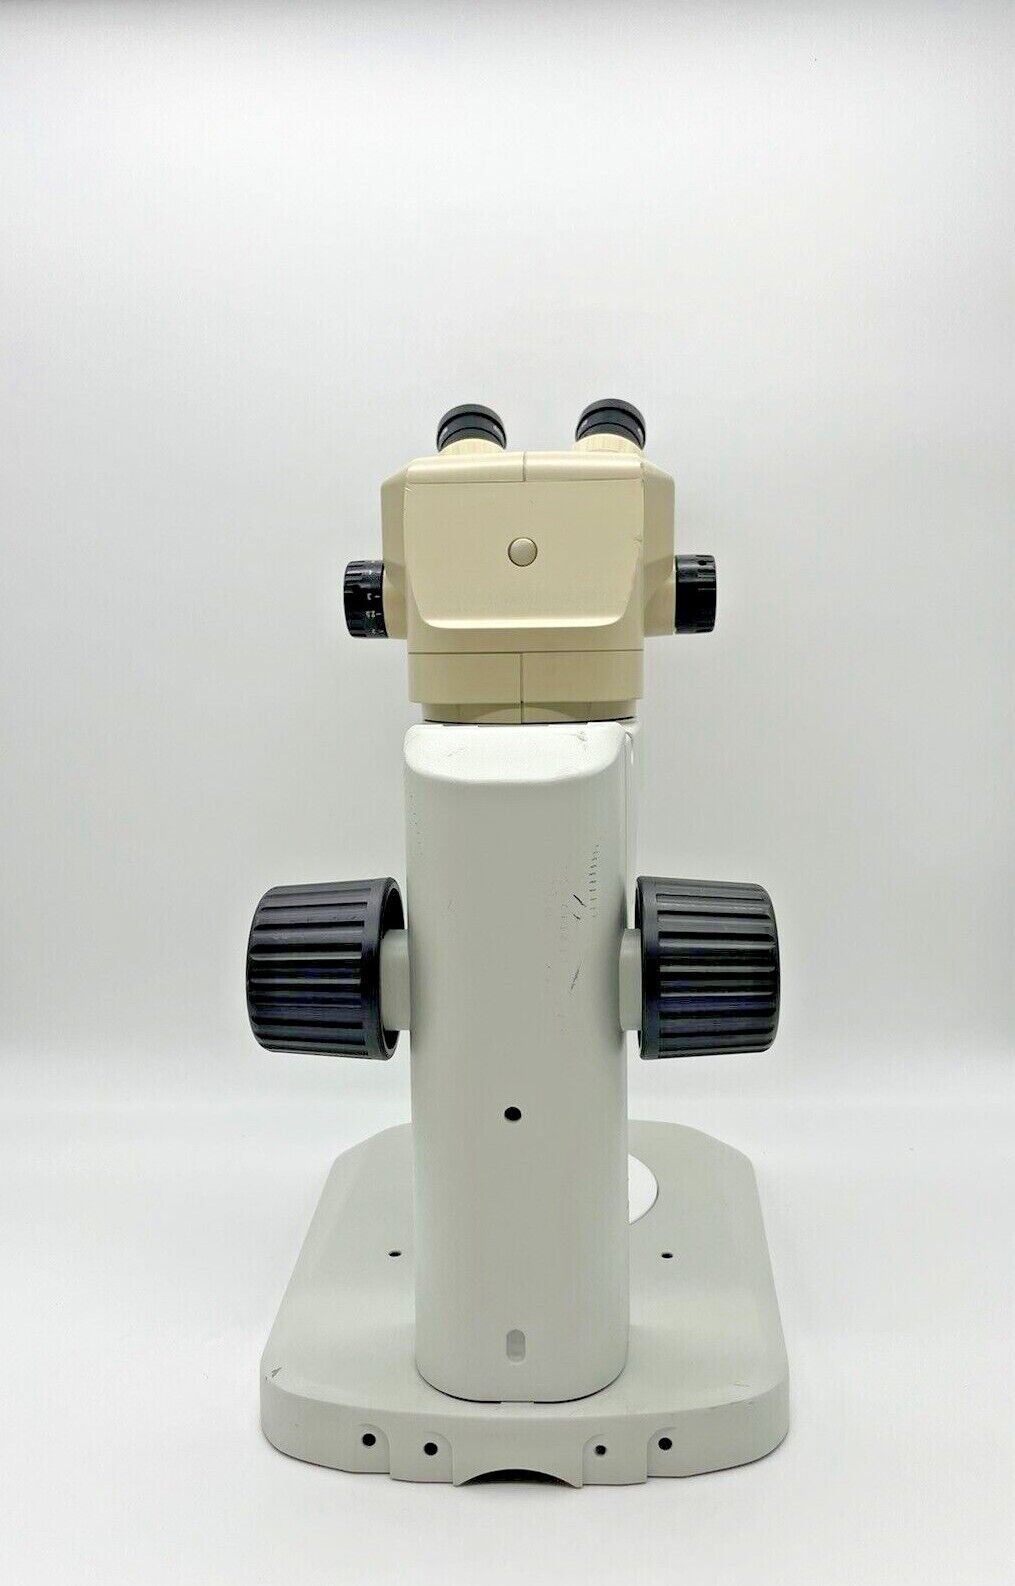 Olympus SZ60 Microscope with LED Ring Light - microscopemarketplace